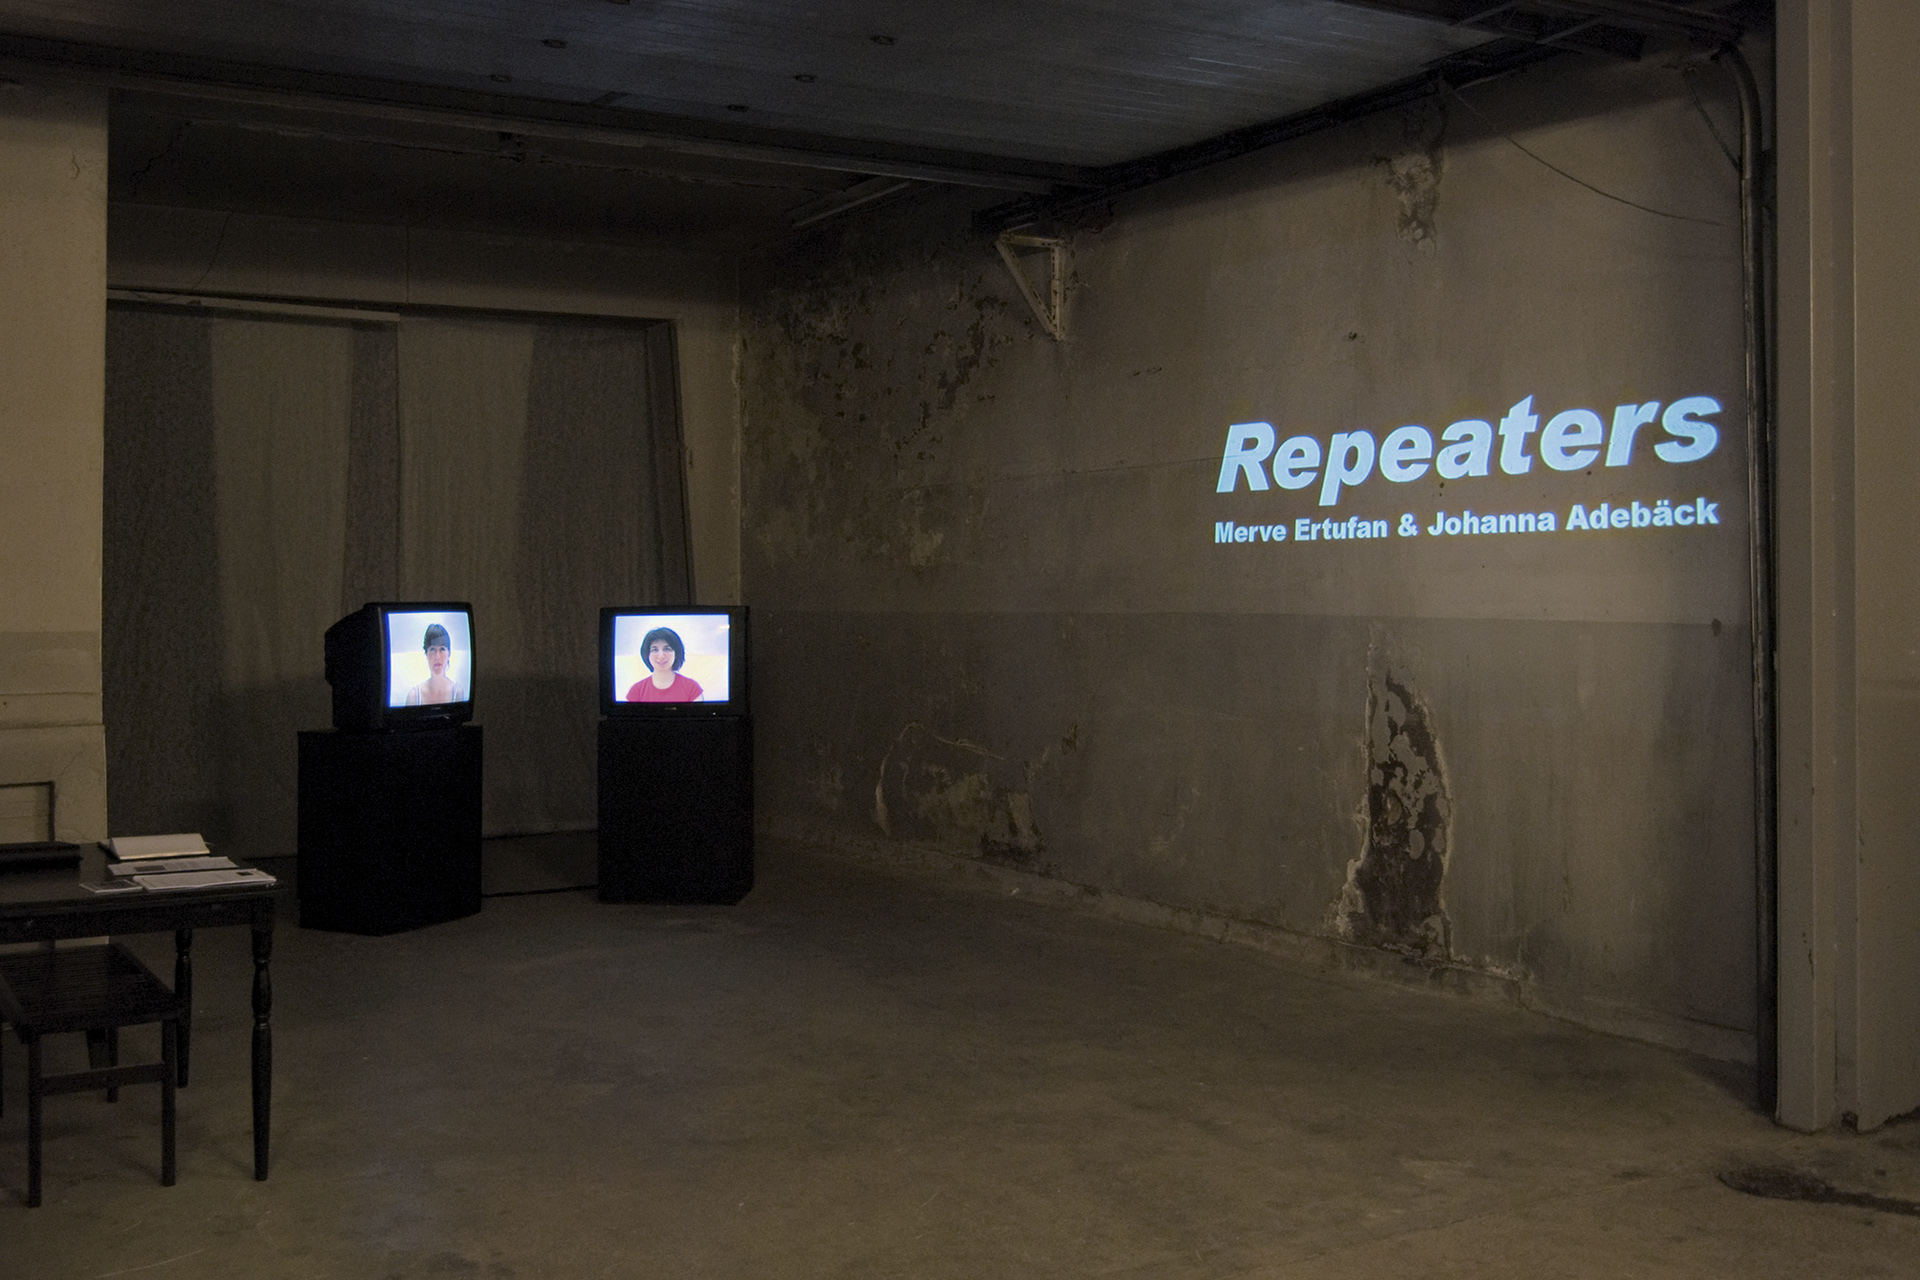 repeaters